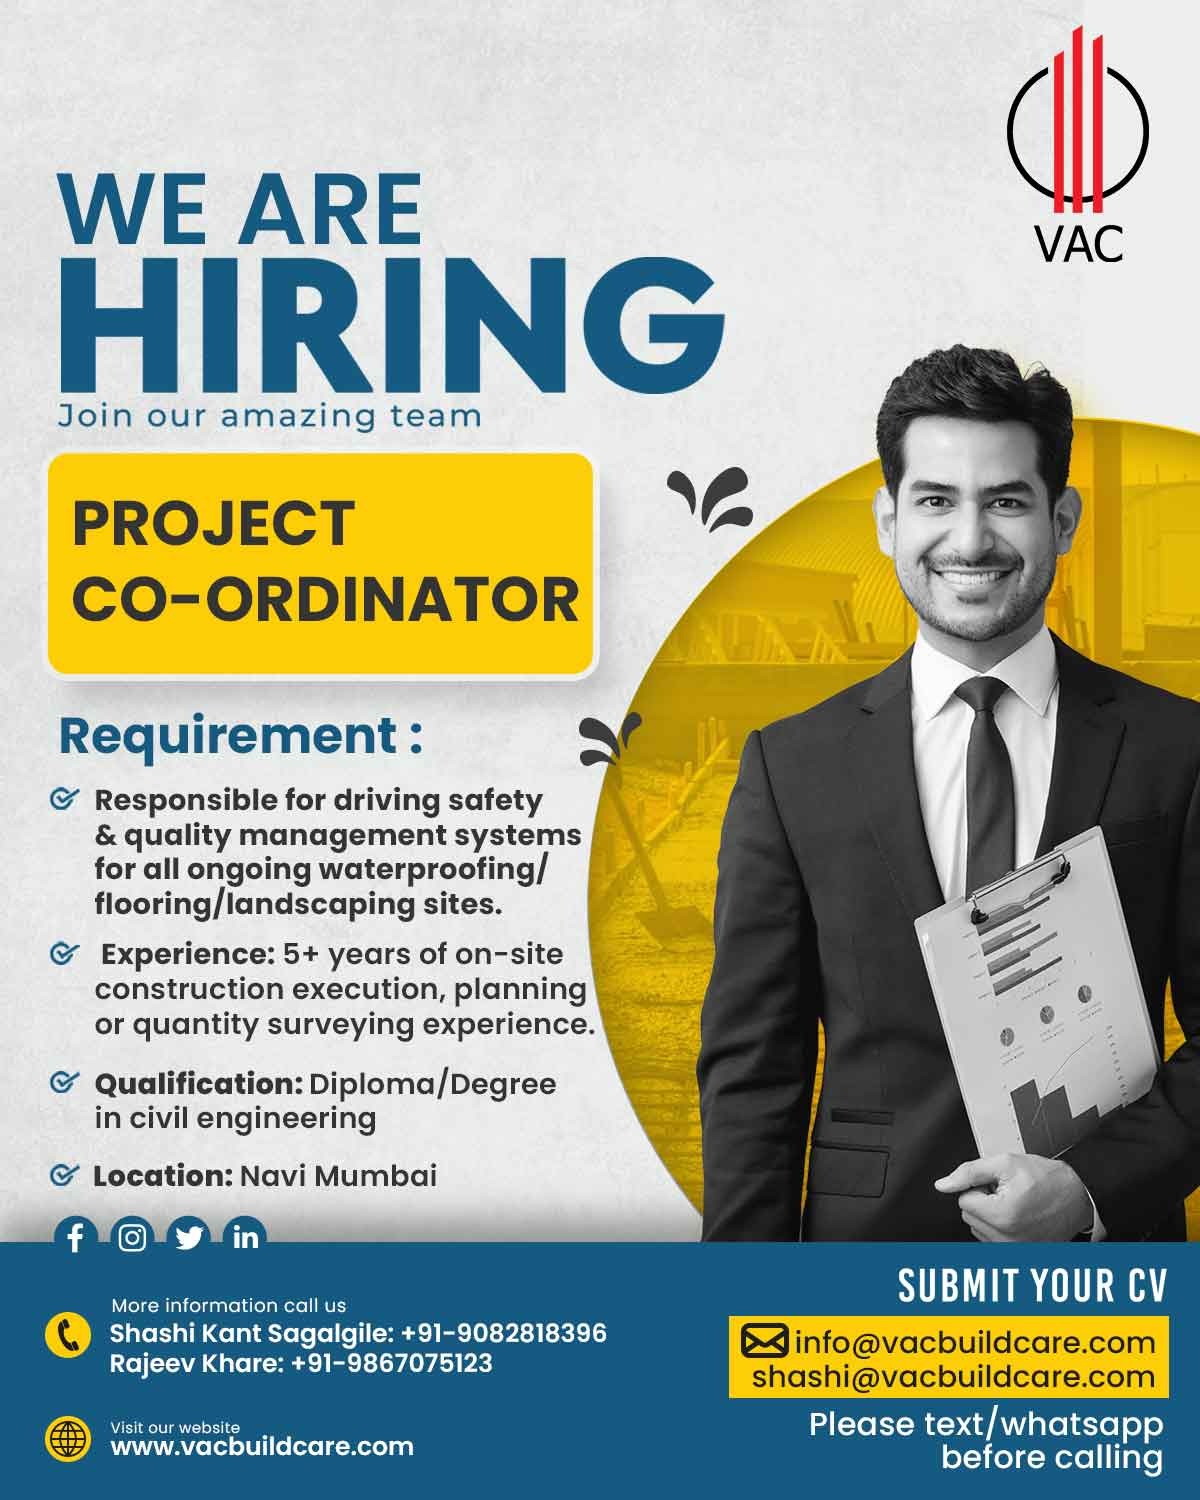 We are Hiring - Project Co-ordinator